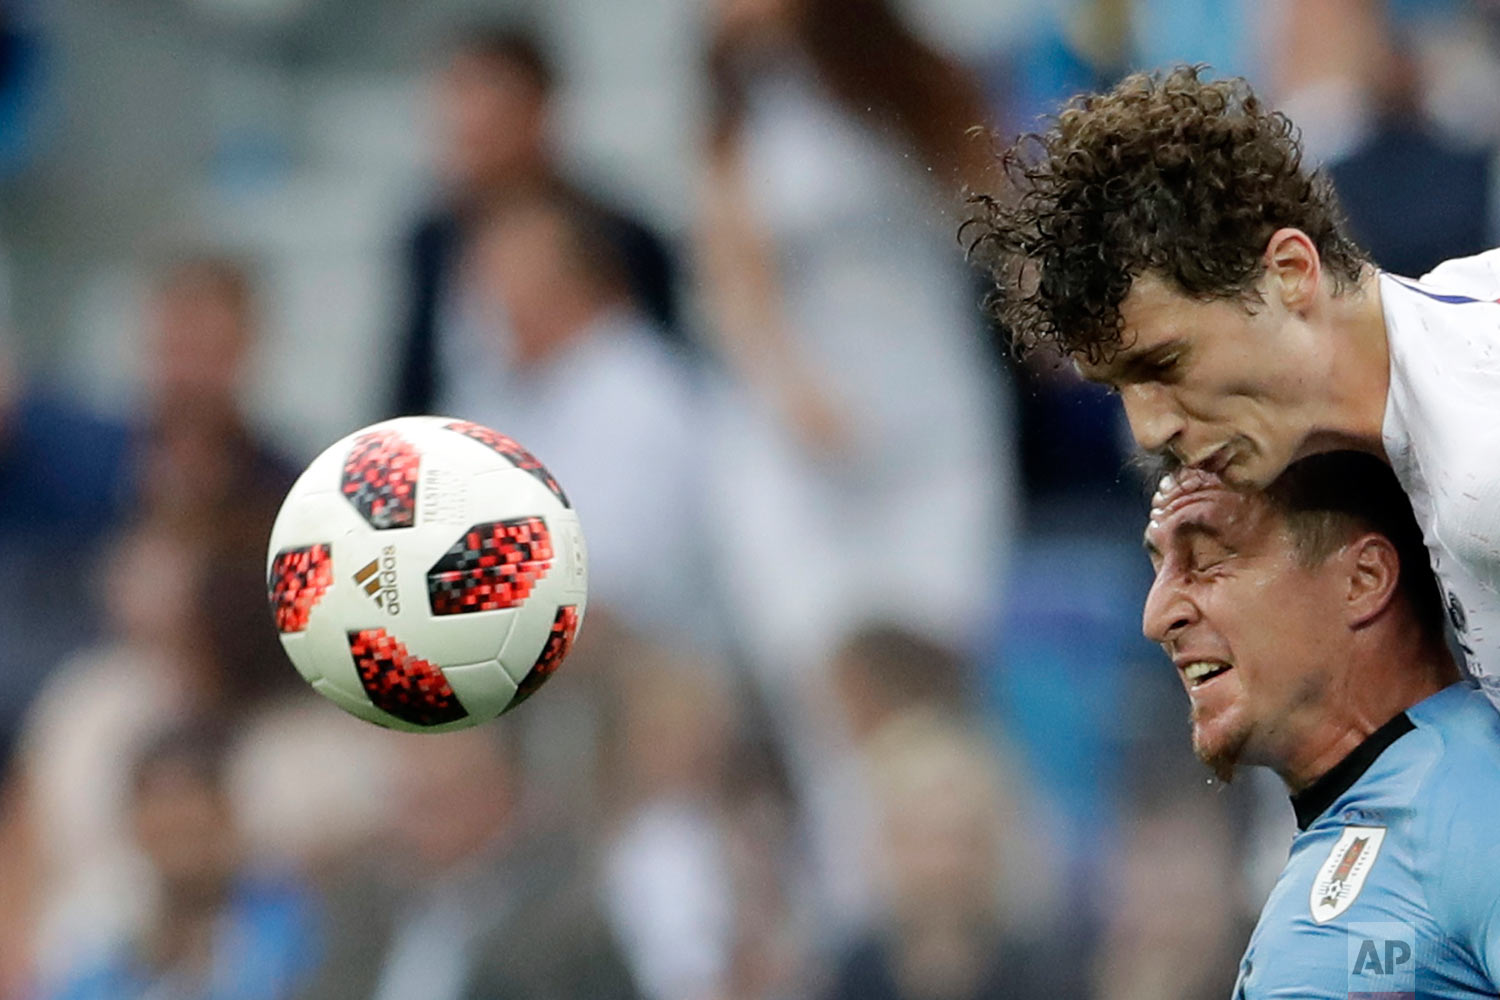  France's Benjamin Pavard, top, and Uruguay's Cristian Rodriguez challenge for the ball during the quarterfinal match between Uruguay and France at the 2018 soccer World Cup in the Nizhny Novgorod Stadium, in Nizhny Novgorod, Russia, Friday, July 6, 